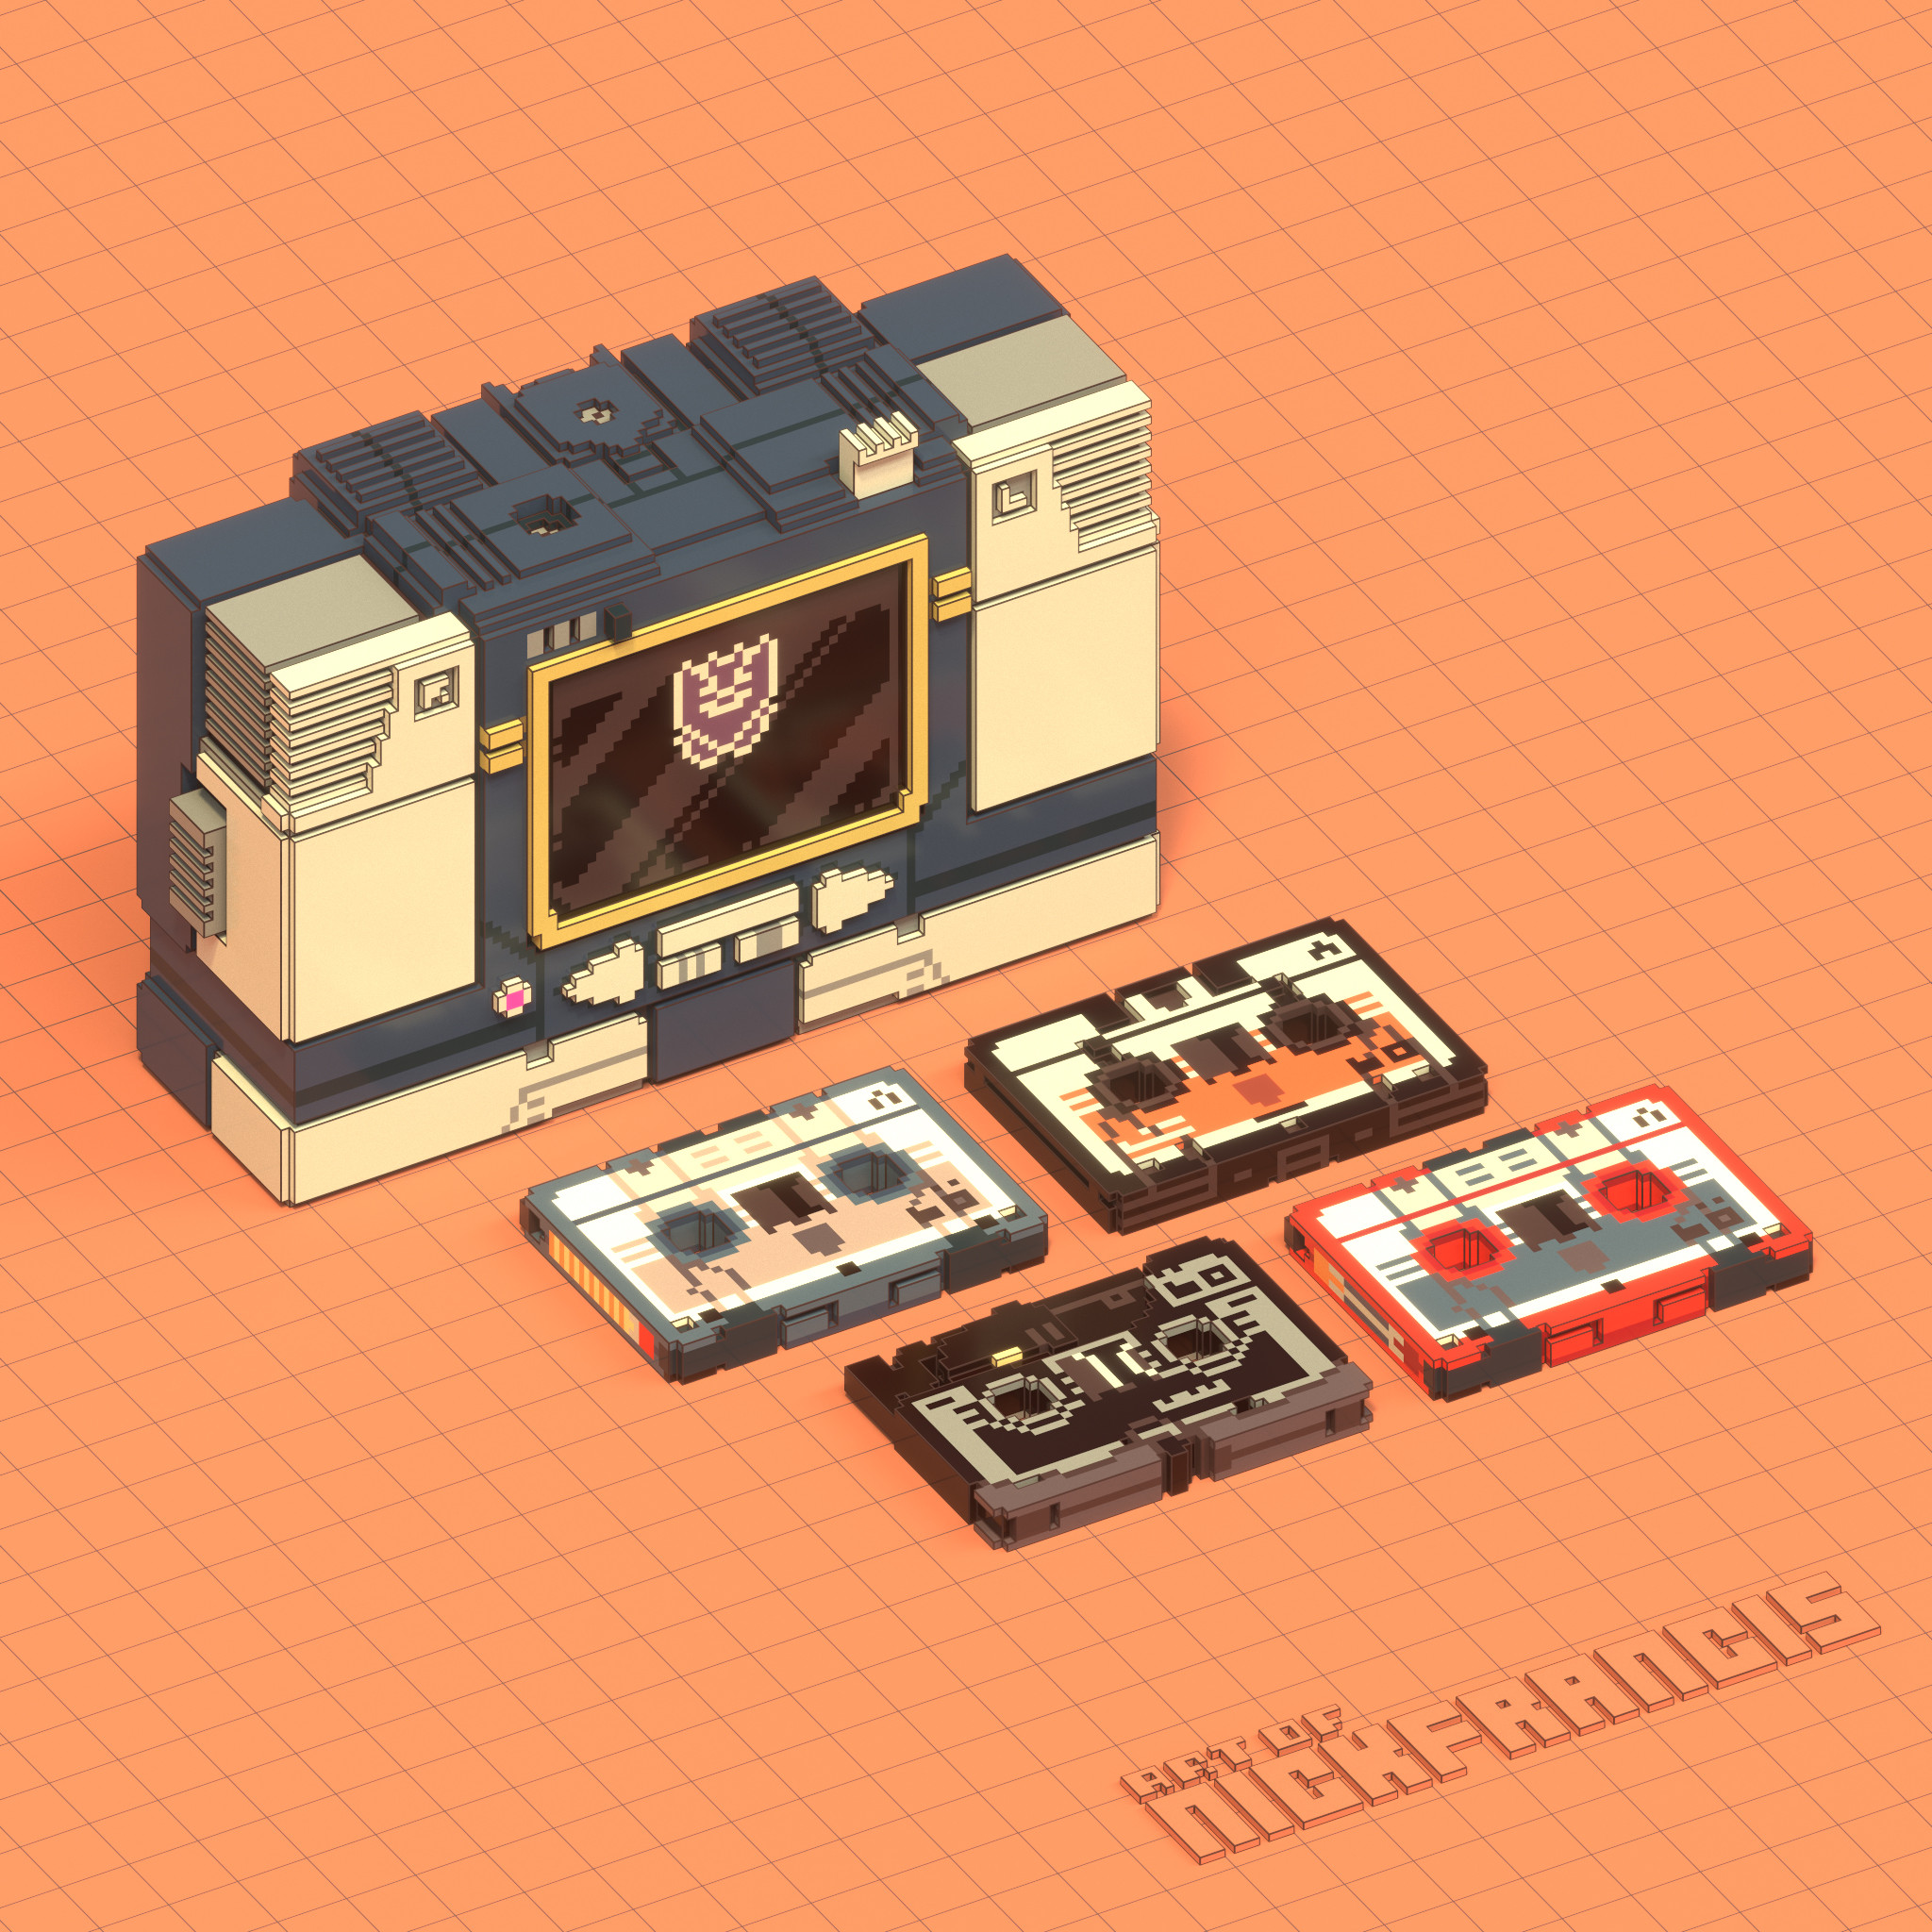 Voxel model rendering of Soundwave, Frenzy, Laserbeak, Ravage and Rumble in their classic "G1" disguises as a cassette player and cassette tapes respectively.